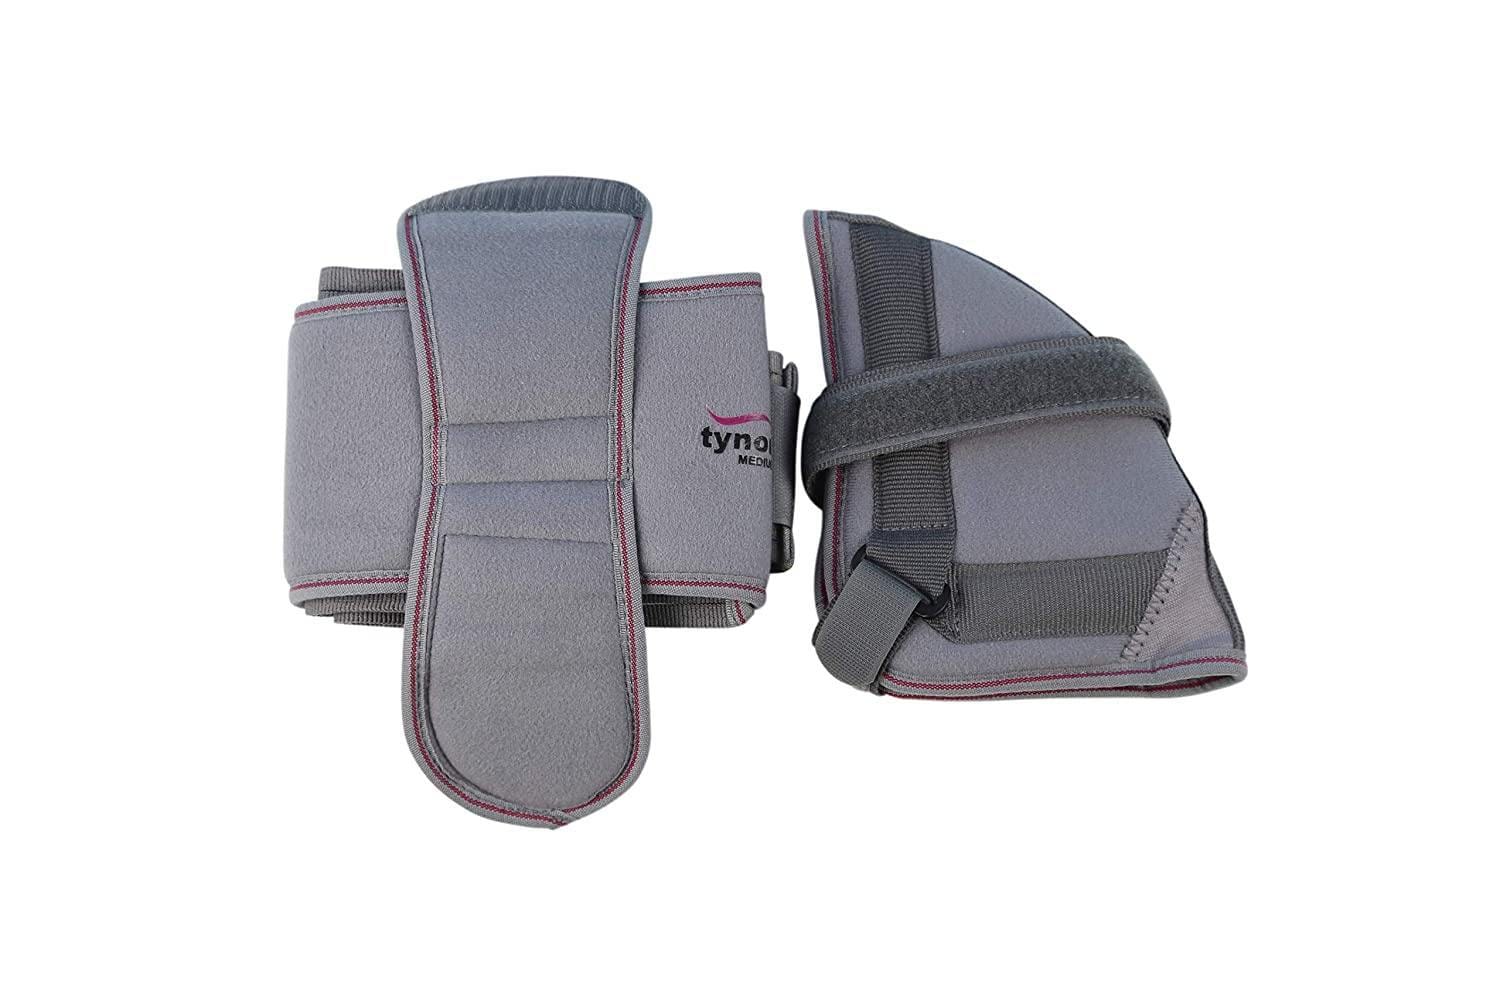 TYNOR Breast Prosthesis,B32, 1 Unit Back / Lumbar Support - Buy TYNOR  Breast Prosthesis,B32, 1 Unit Back / Lumbar Support Online at Best Prices  in India - Sports & Fitness